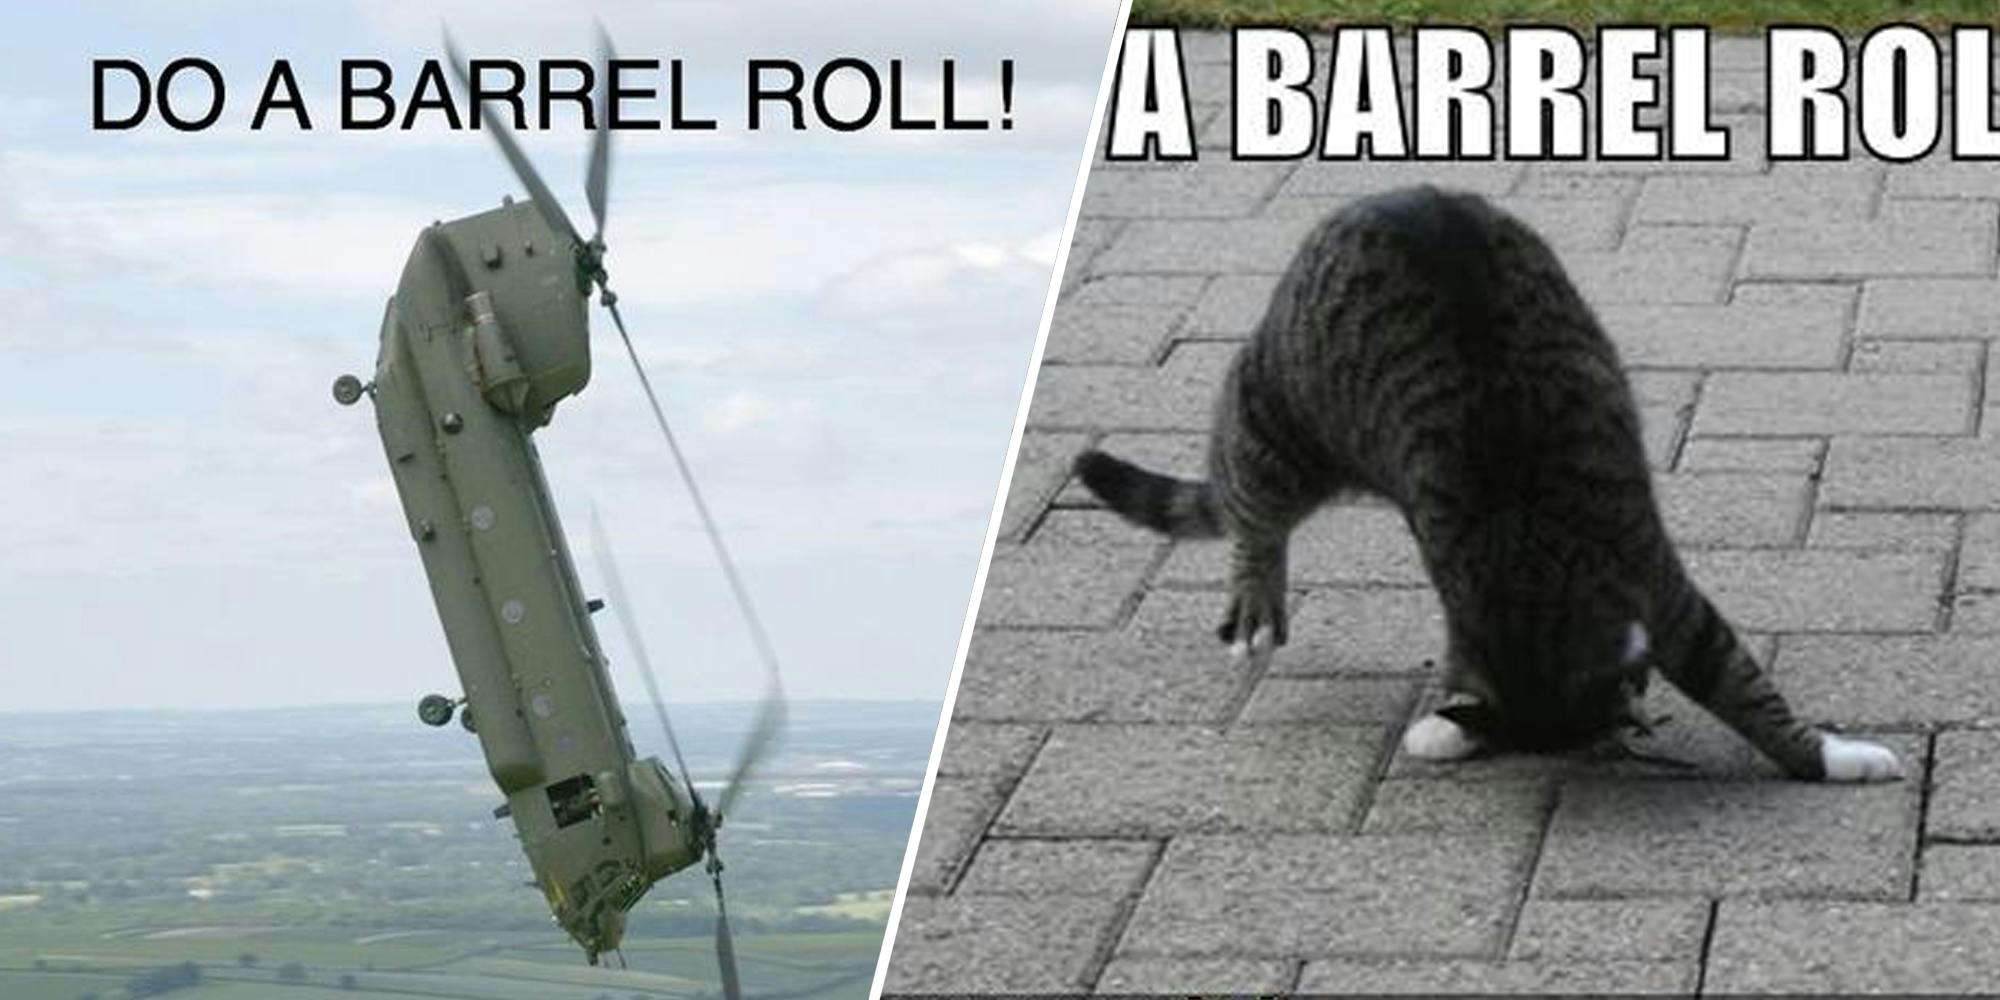 Two do the barrel roll memes